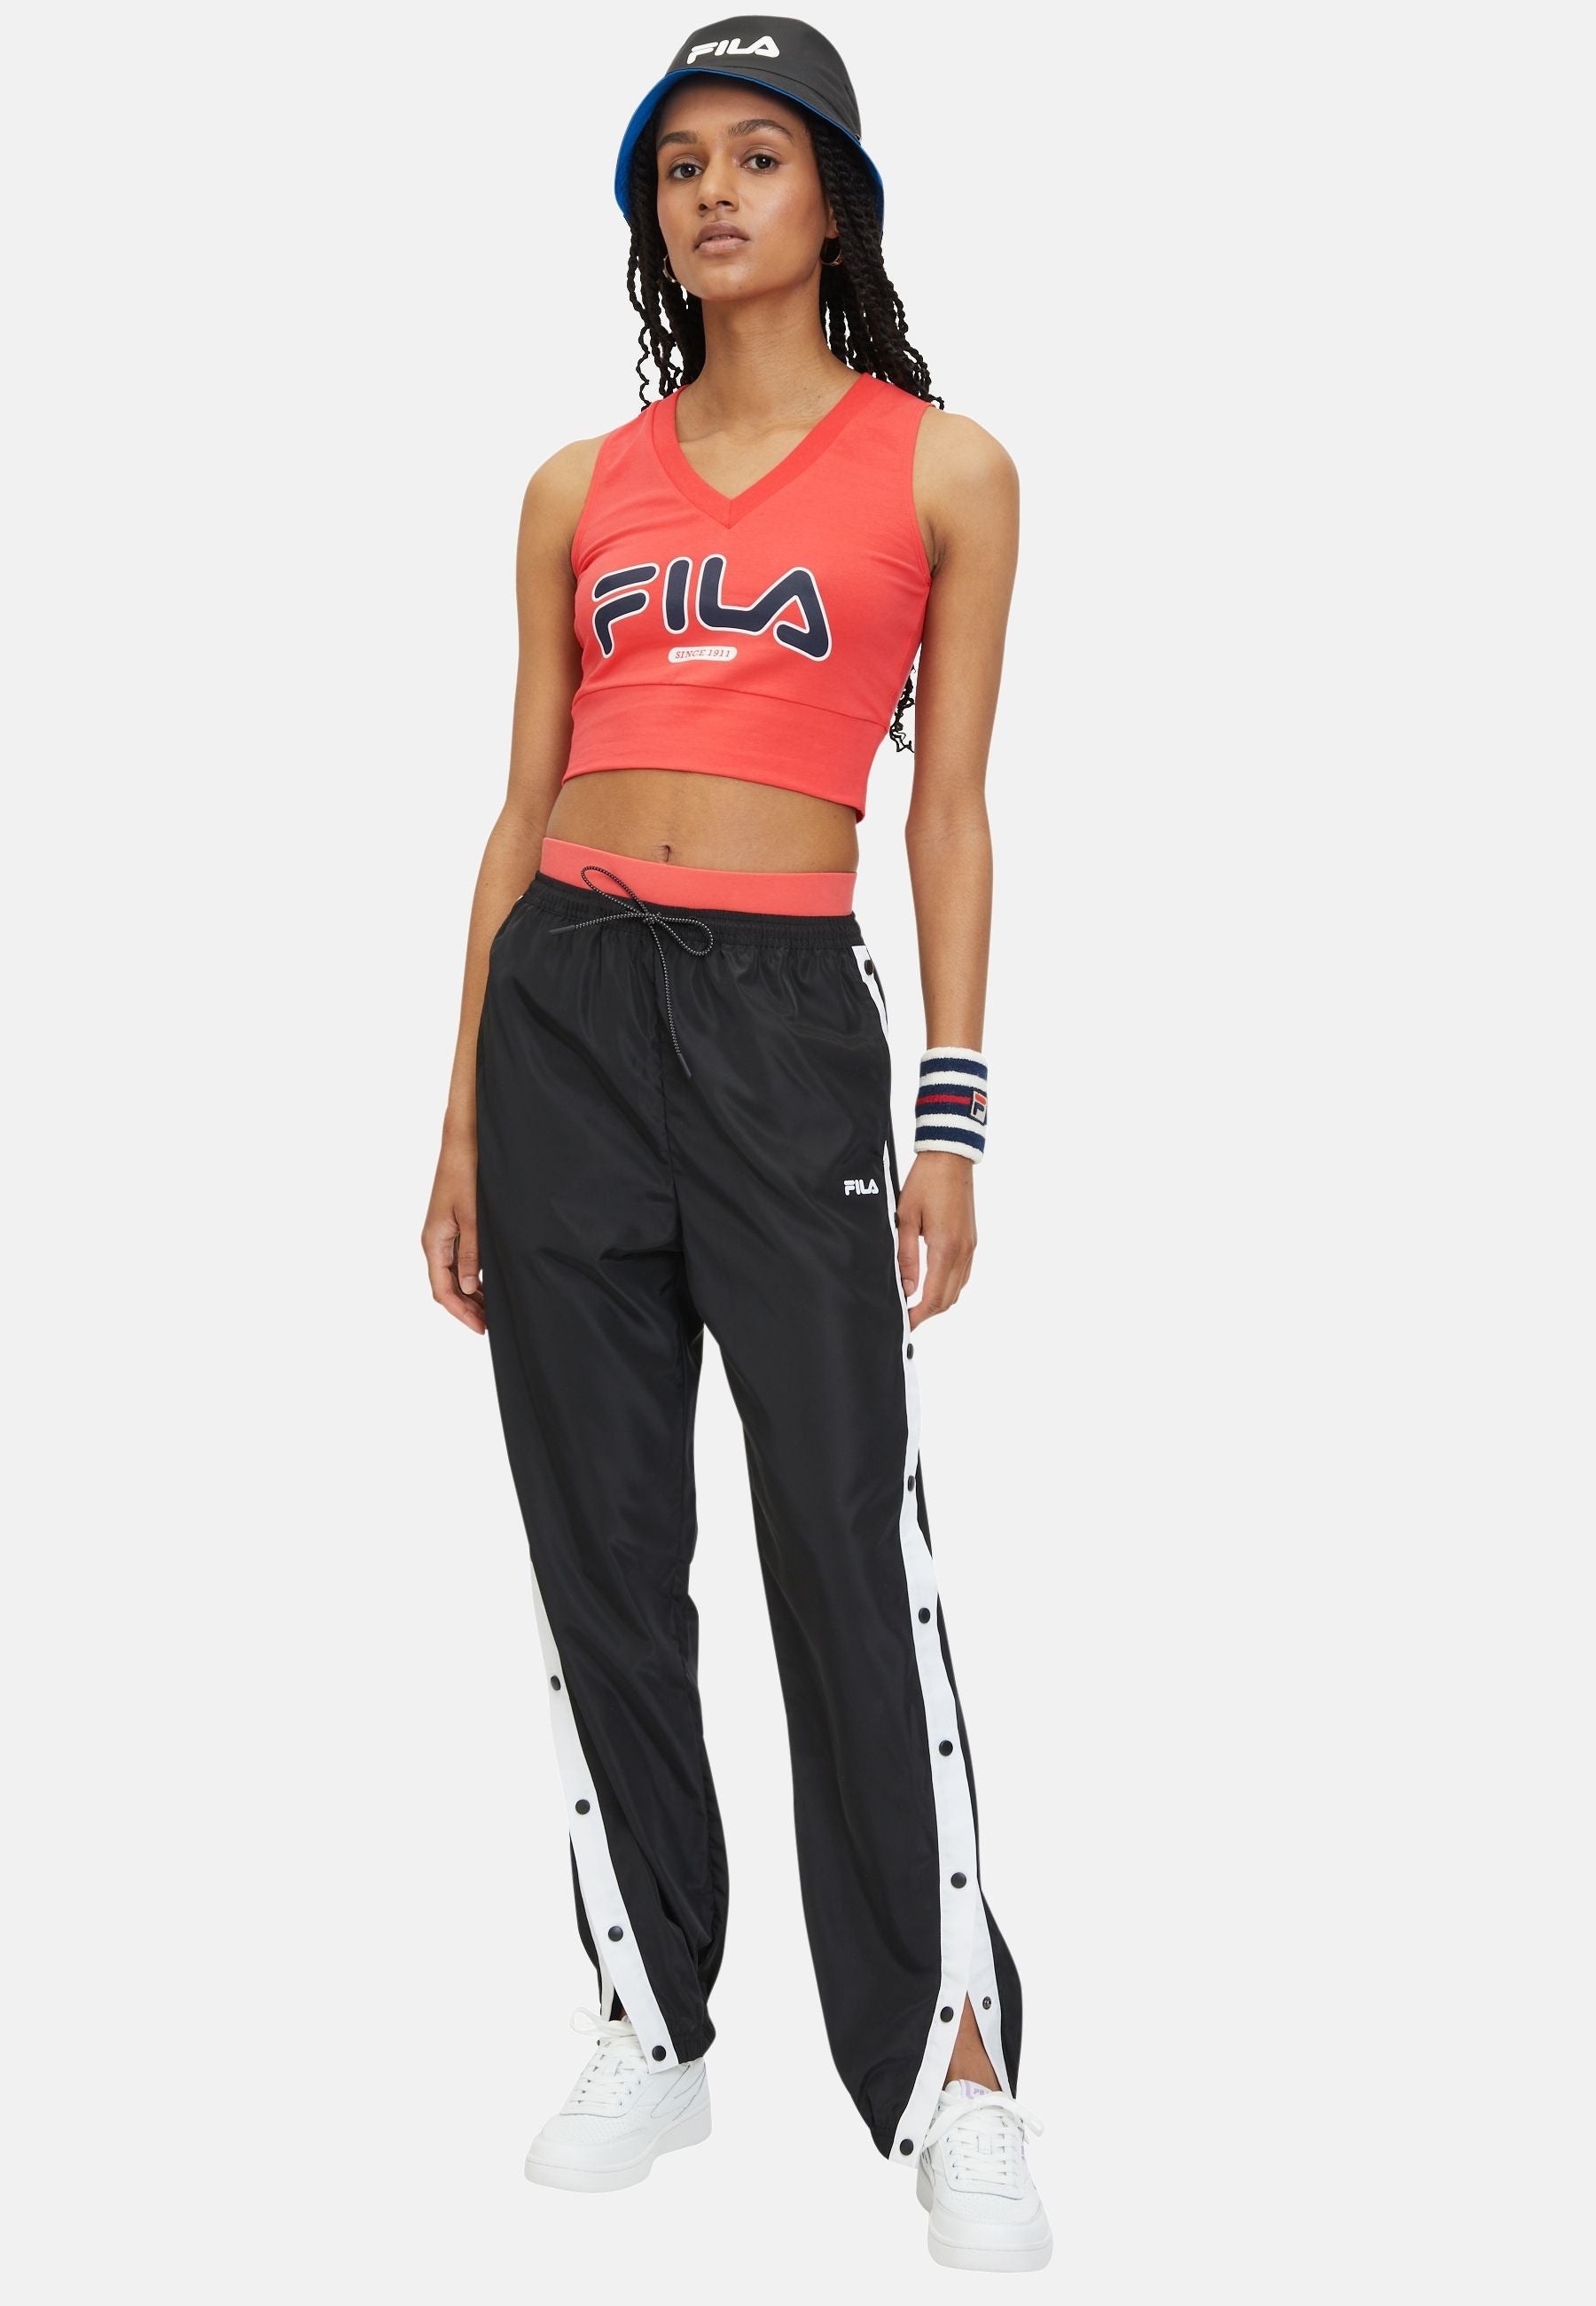 Laixi Cropped V-Neck Top in Cayenne Tops Fila   